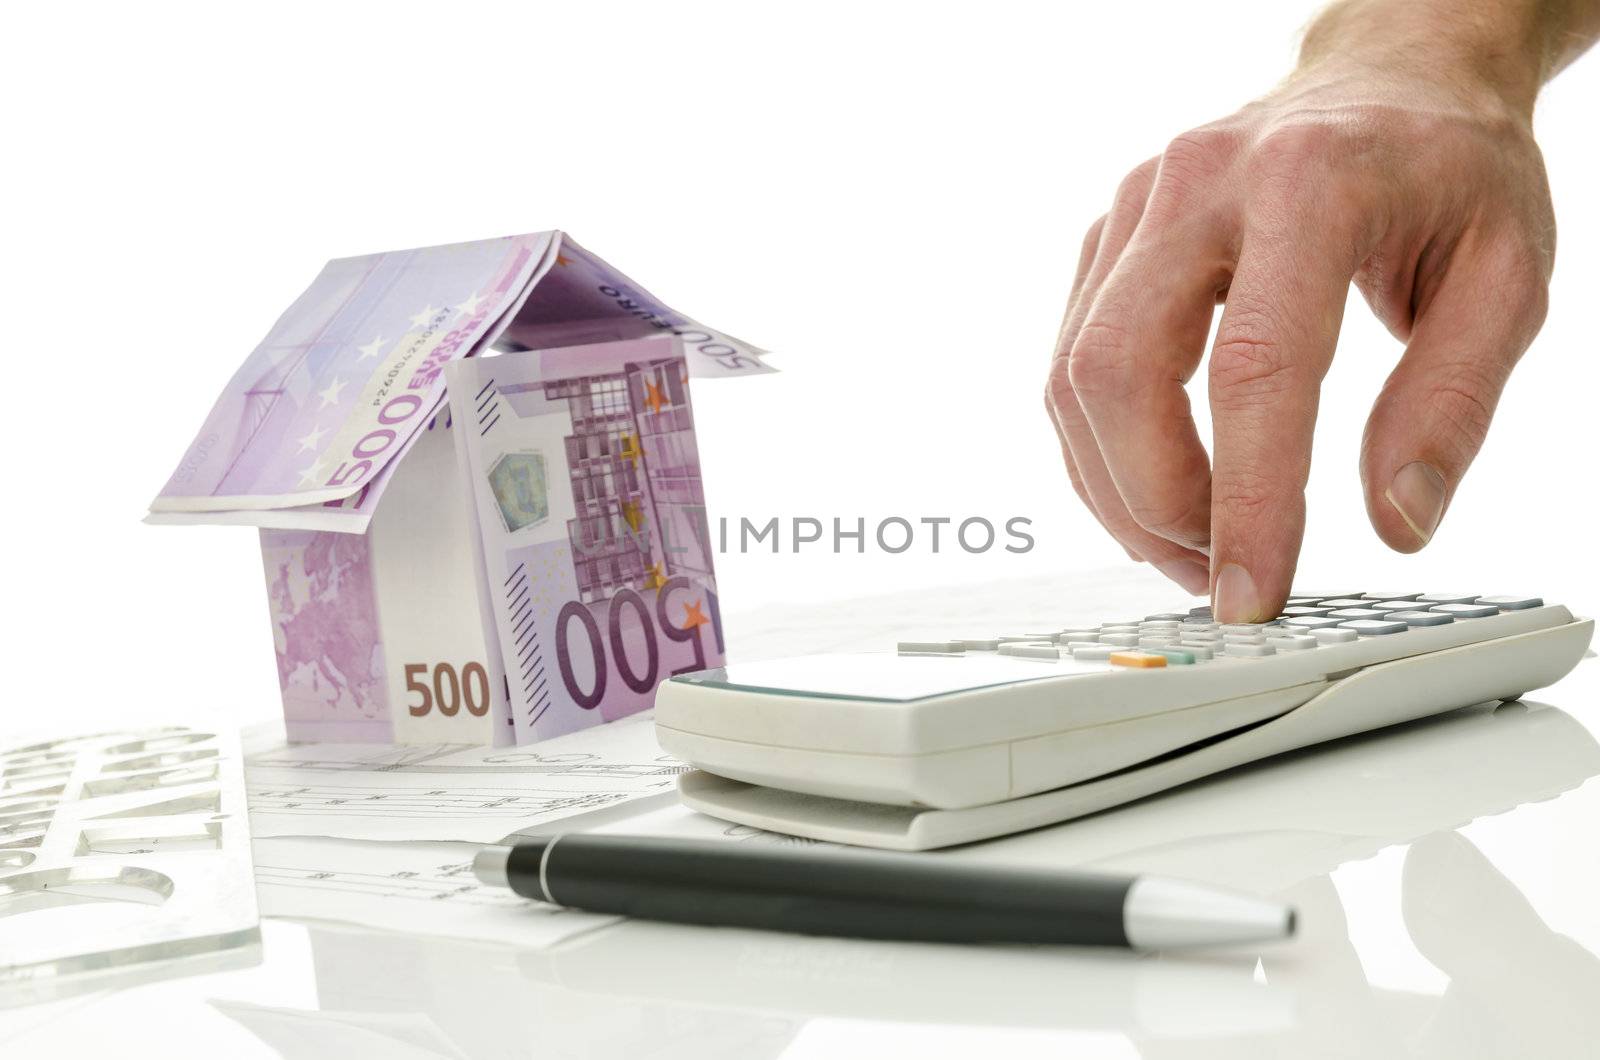 Contractor calculating costs of a house. House made of Euro money in background. Focus on a hand.